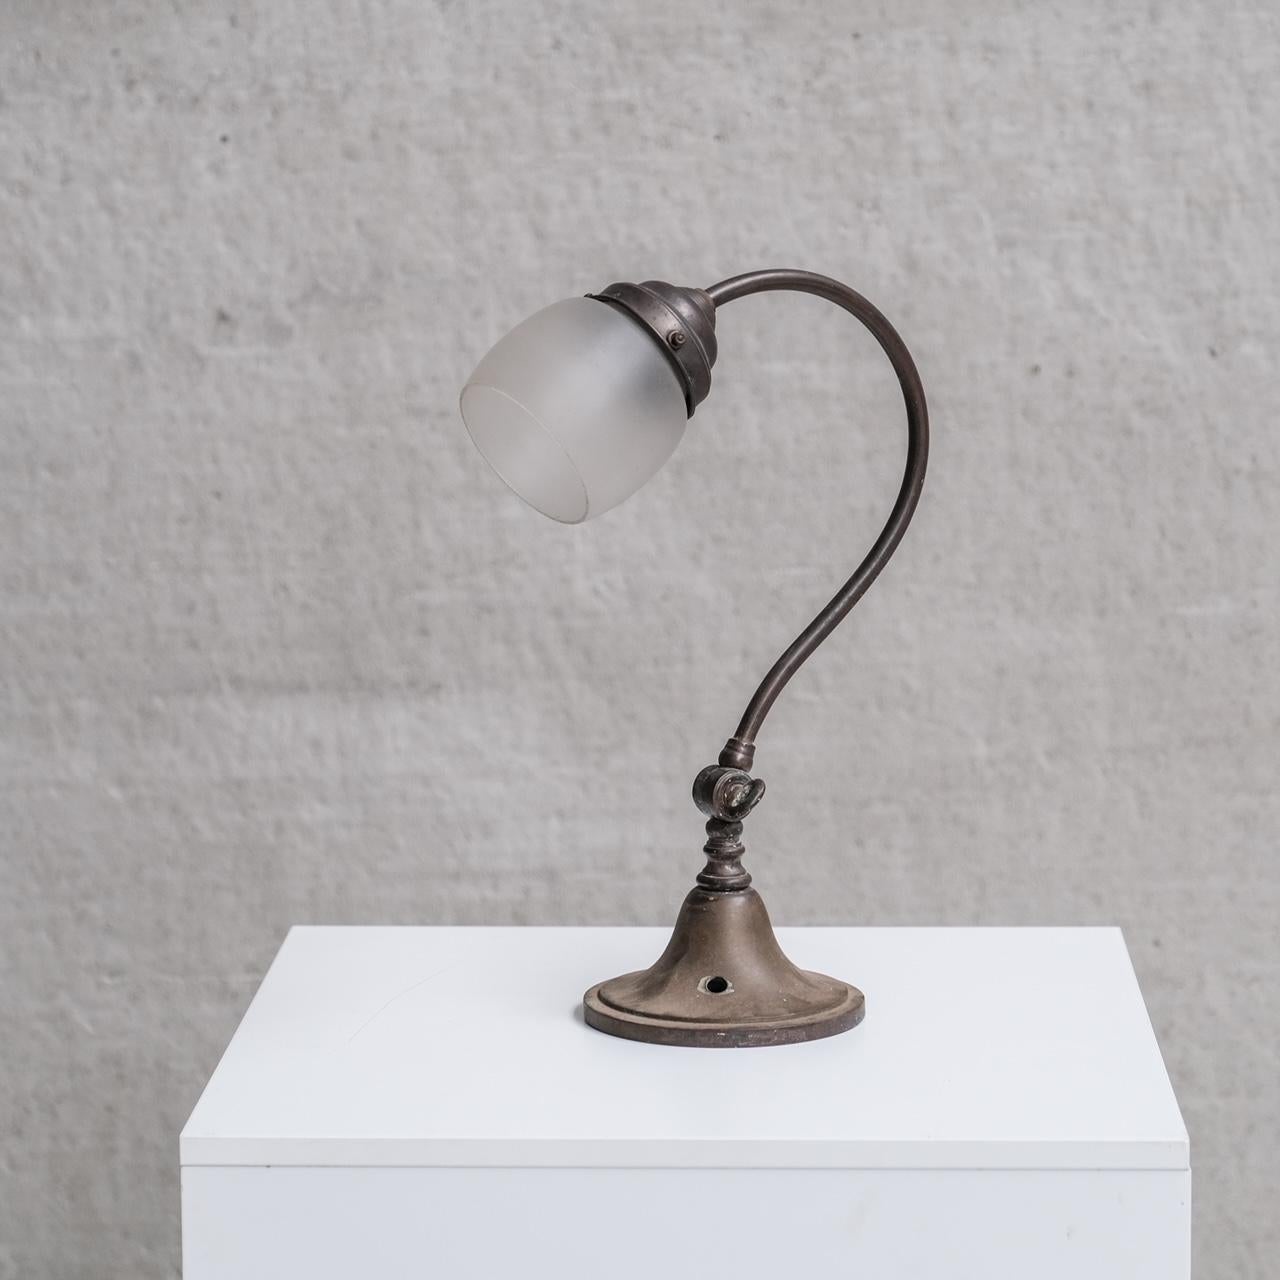 An antique metal table lamp.

France, c1930s.

Naturally patinated metal, paired with an open frosted glass shade.

Since re-wired and PAT tested.

Internal ref: 27/12/23/014.

Good vintage condition, some scuffs and wear commensurate with